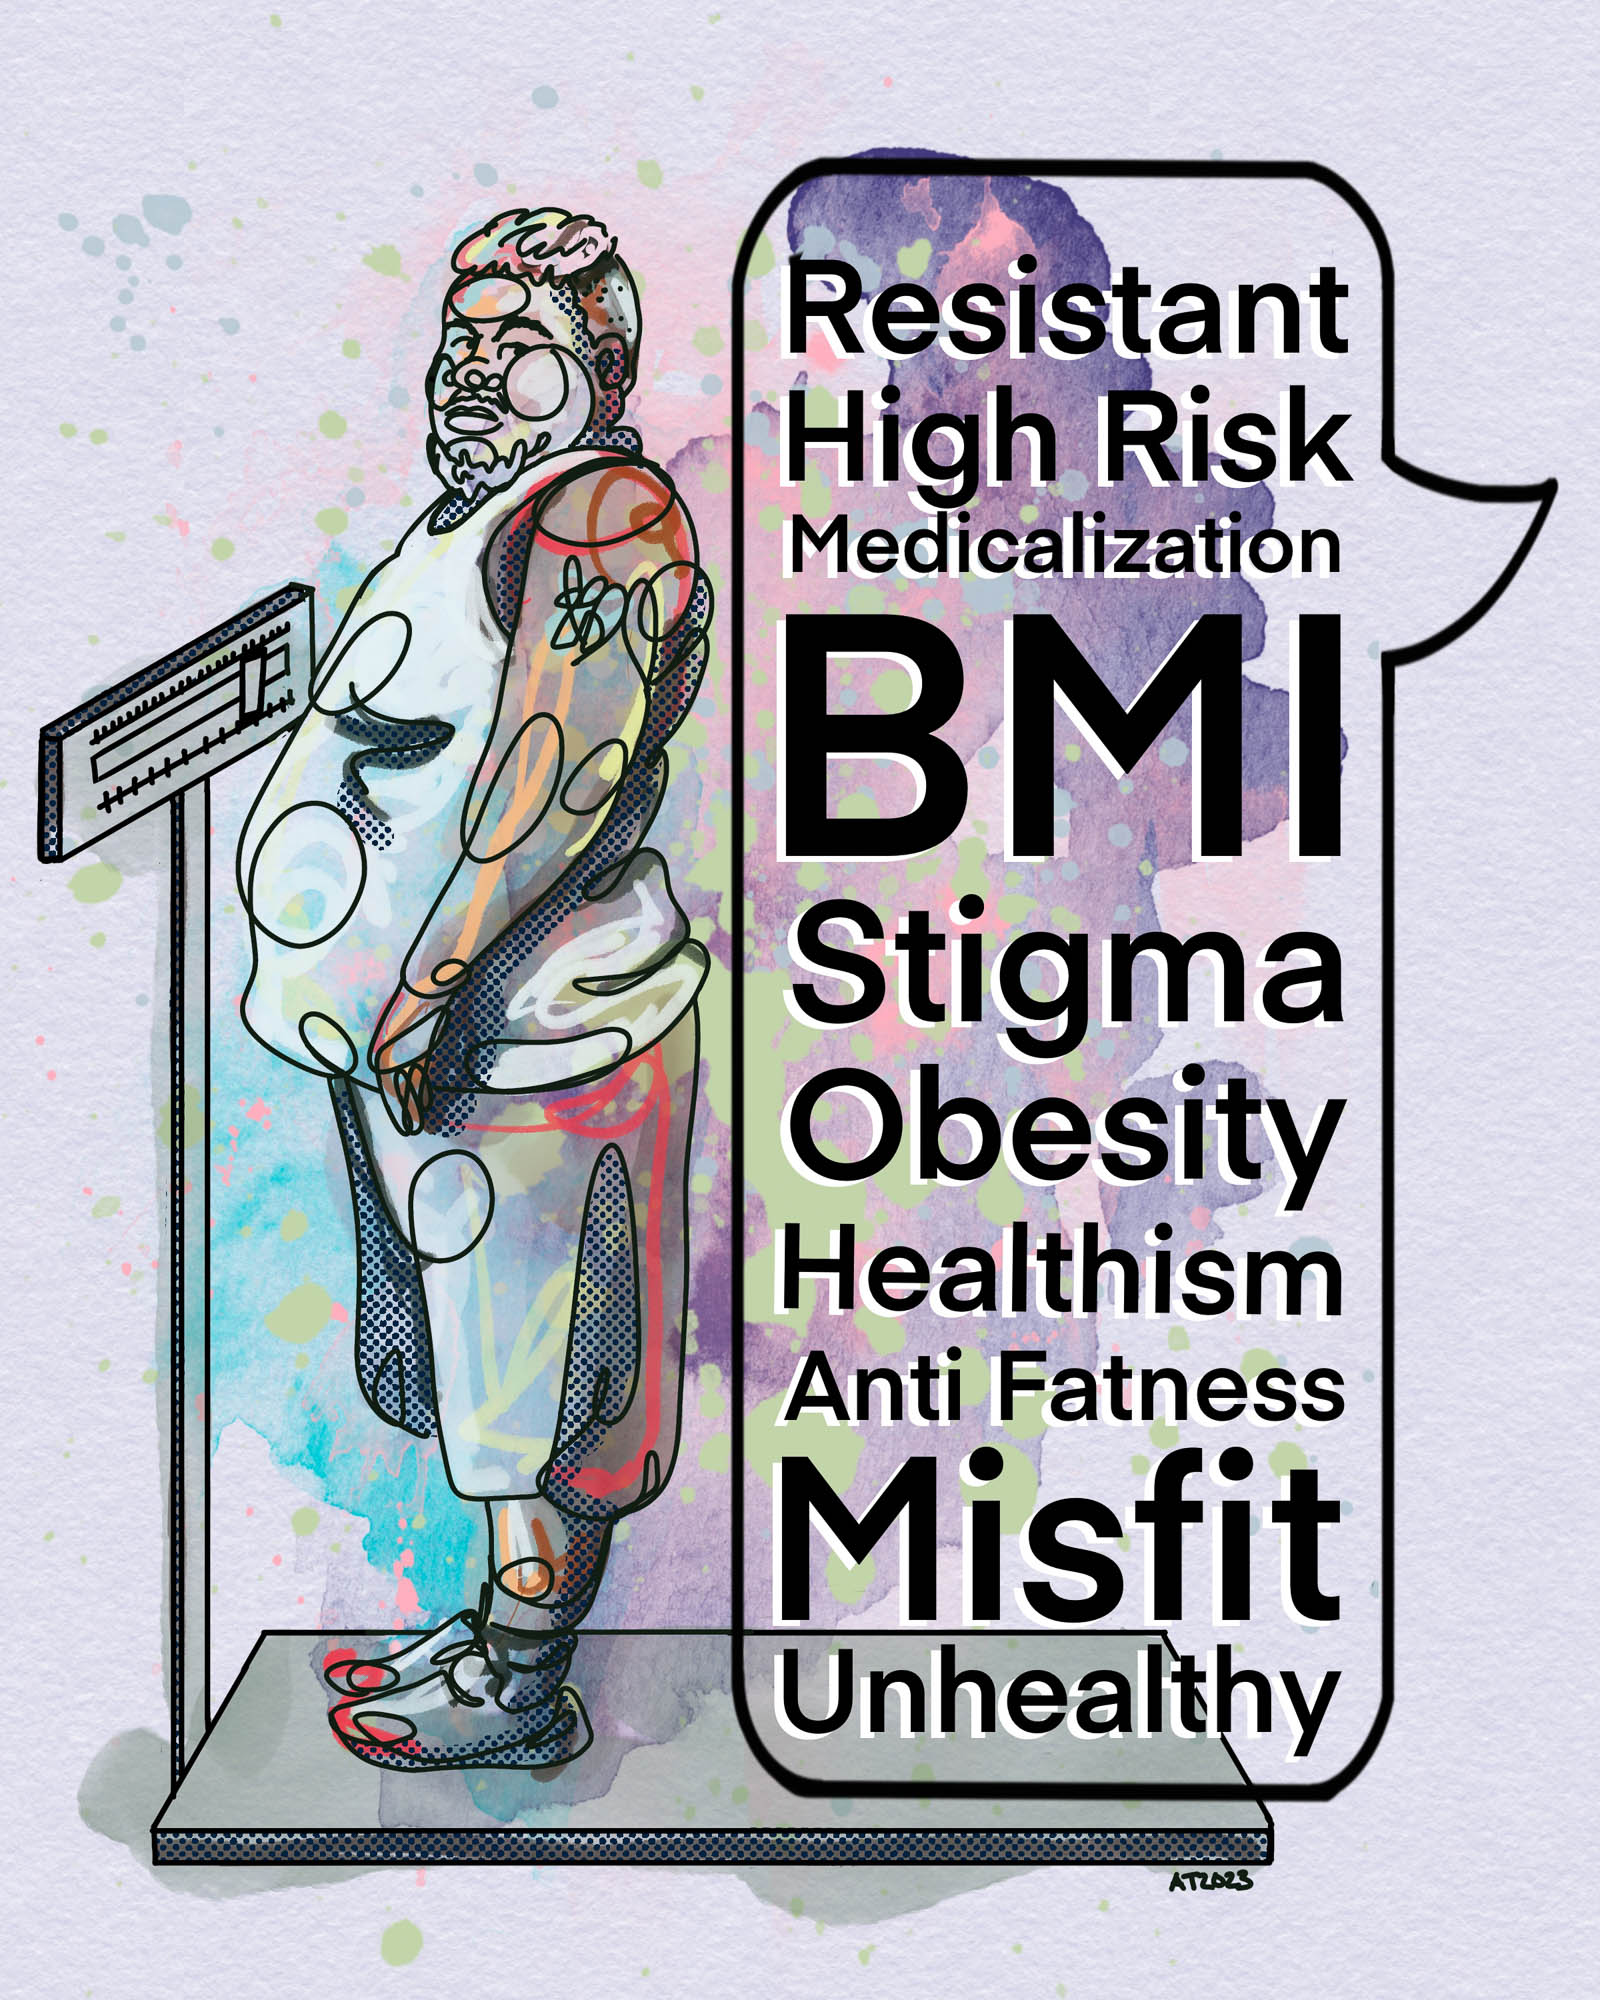 Line drawing of a fat person standing on a medical scale beside a list of anti-fat words encountered in health care.